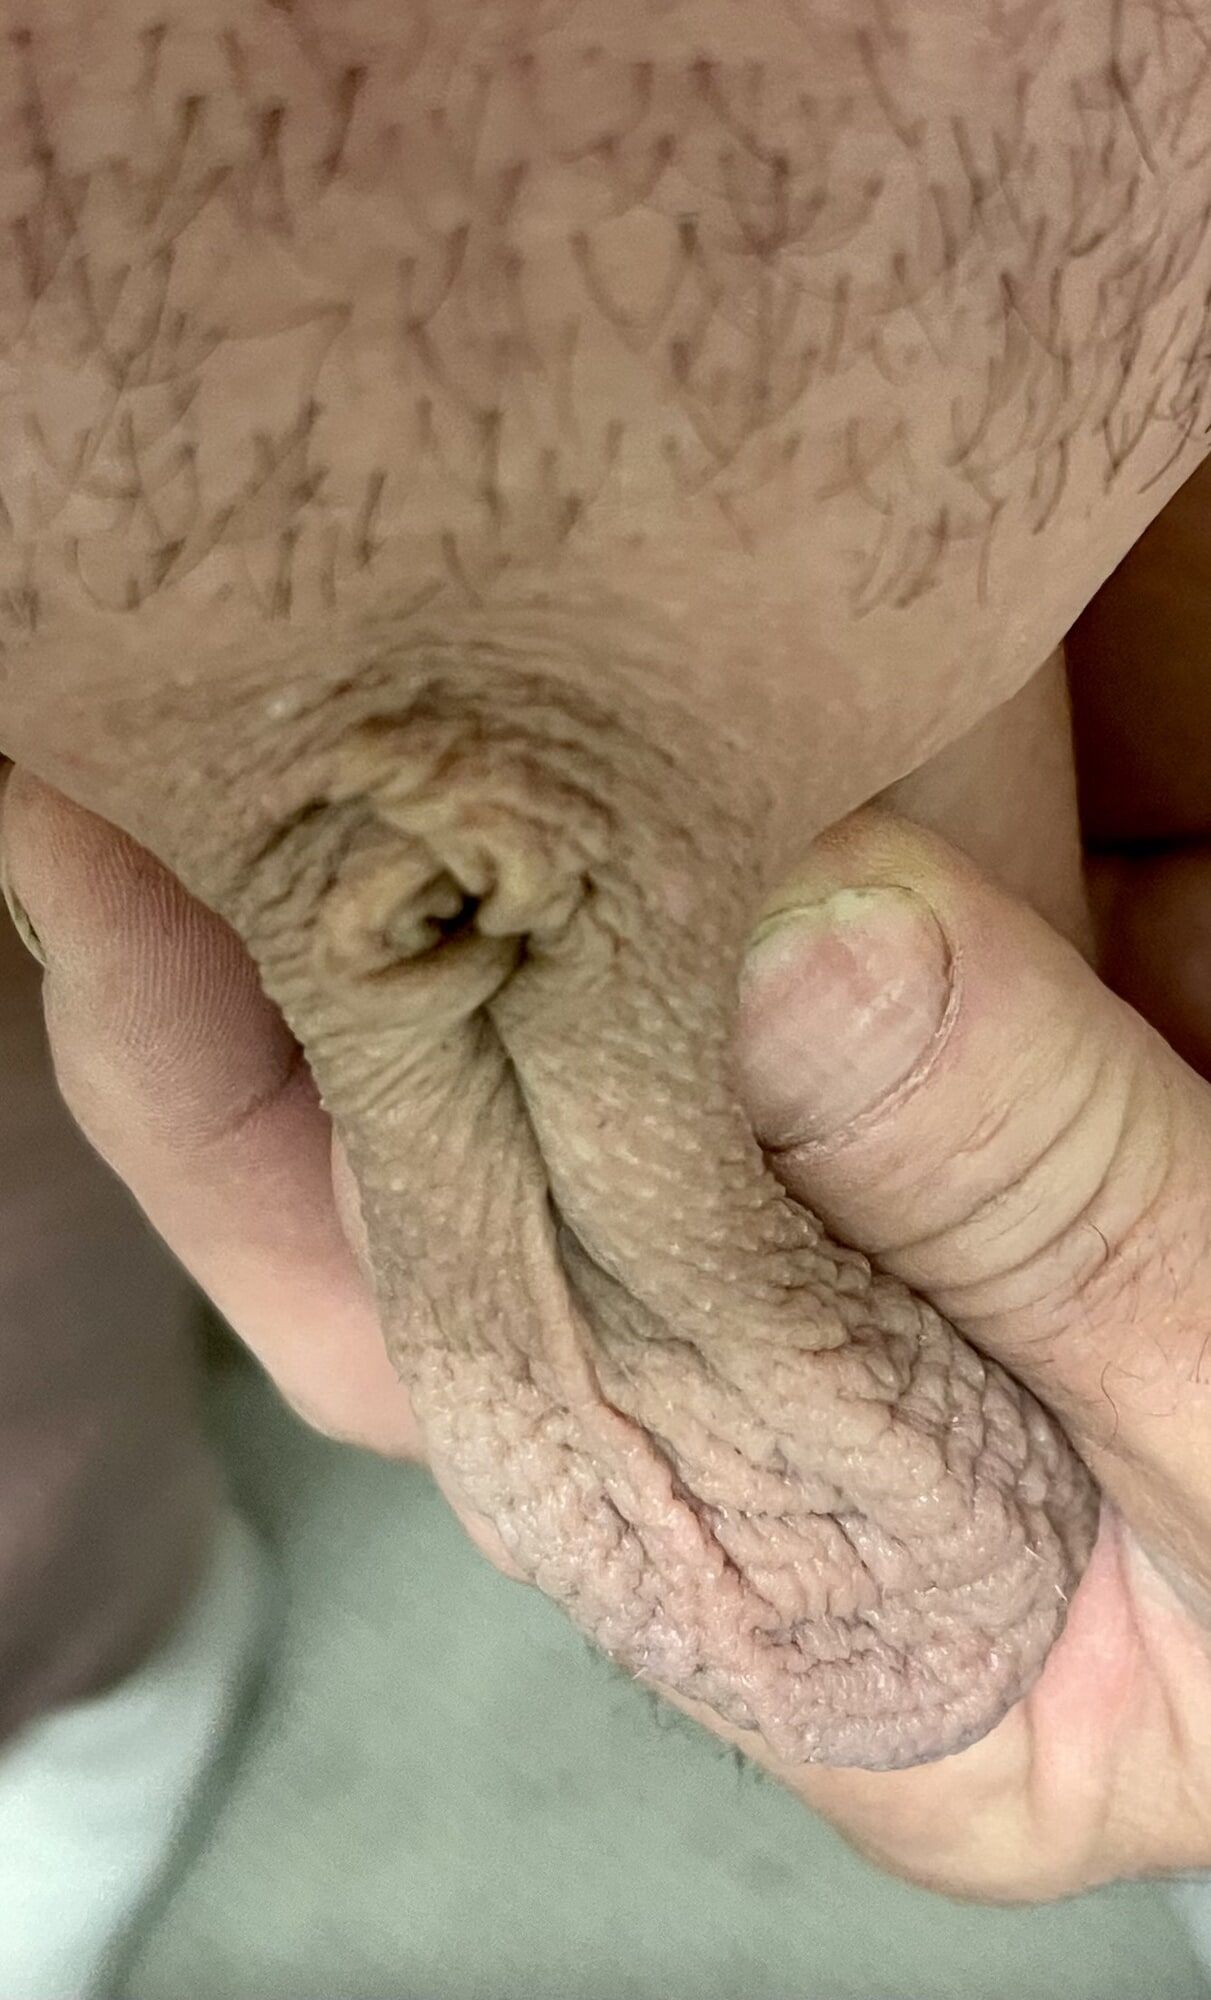 Me and my inverted cock #7